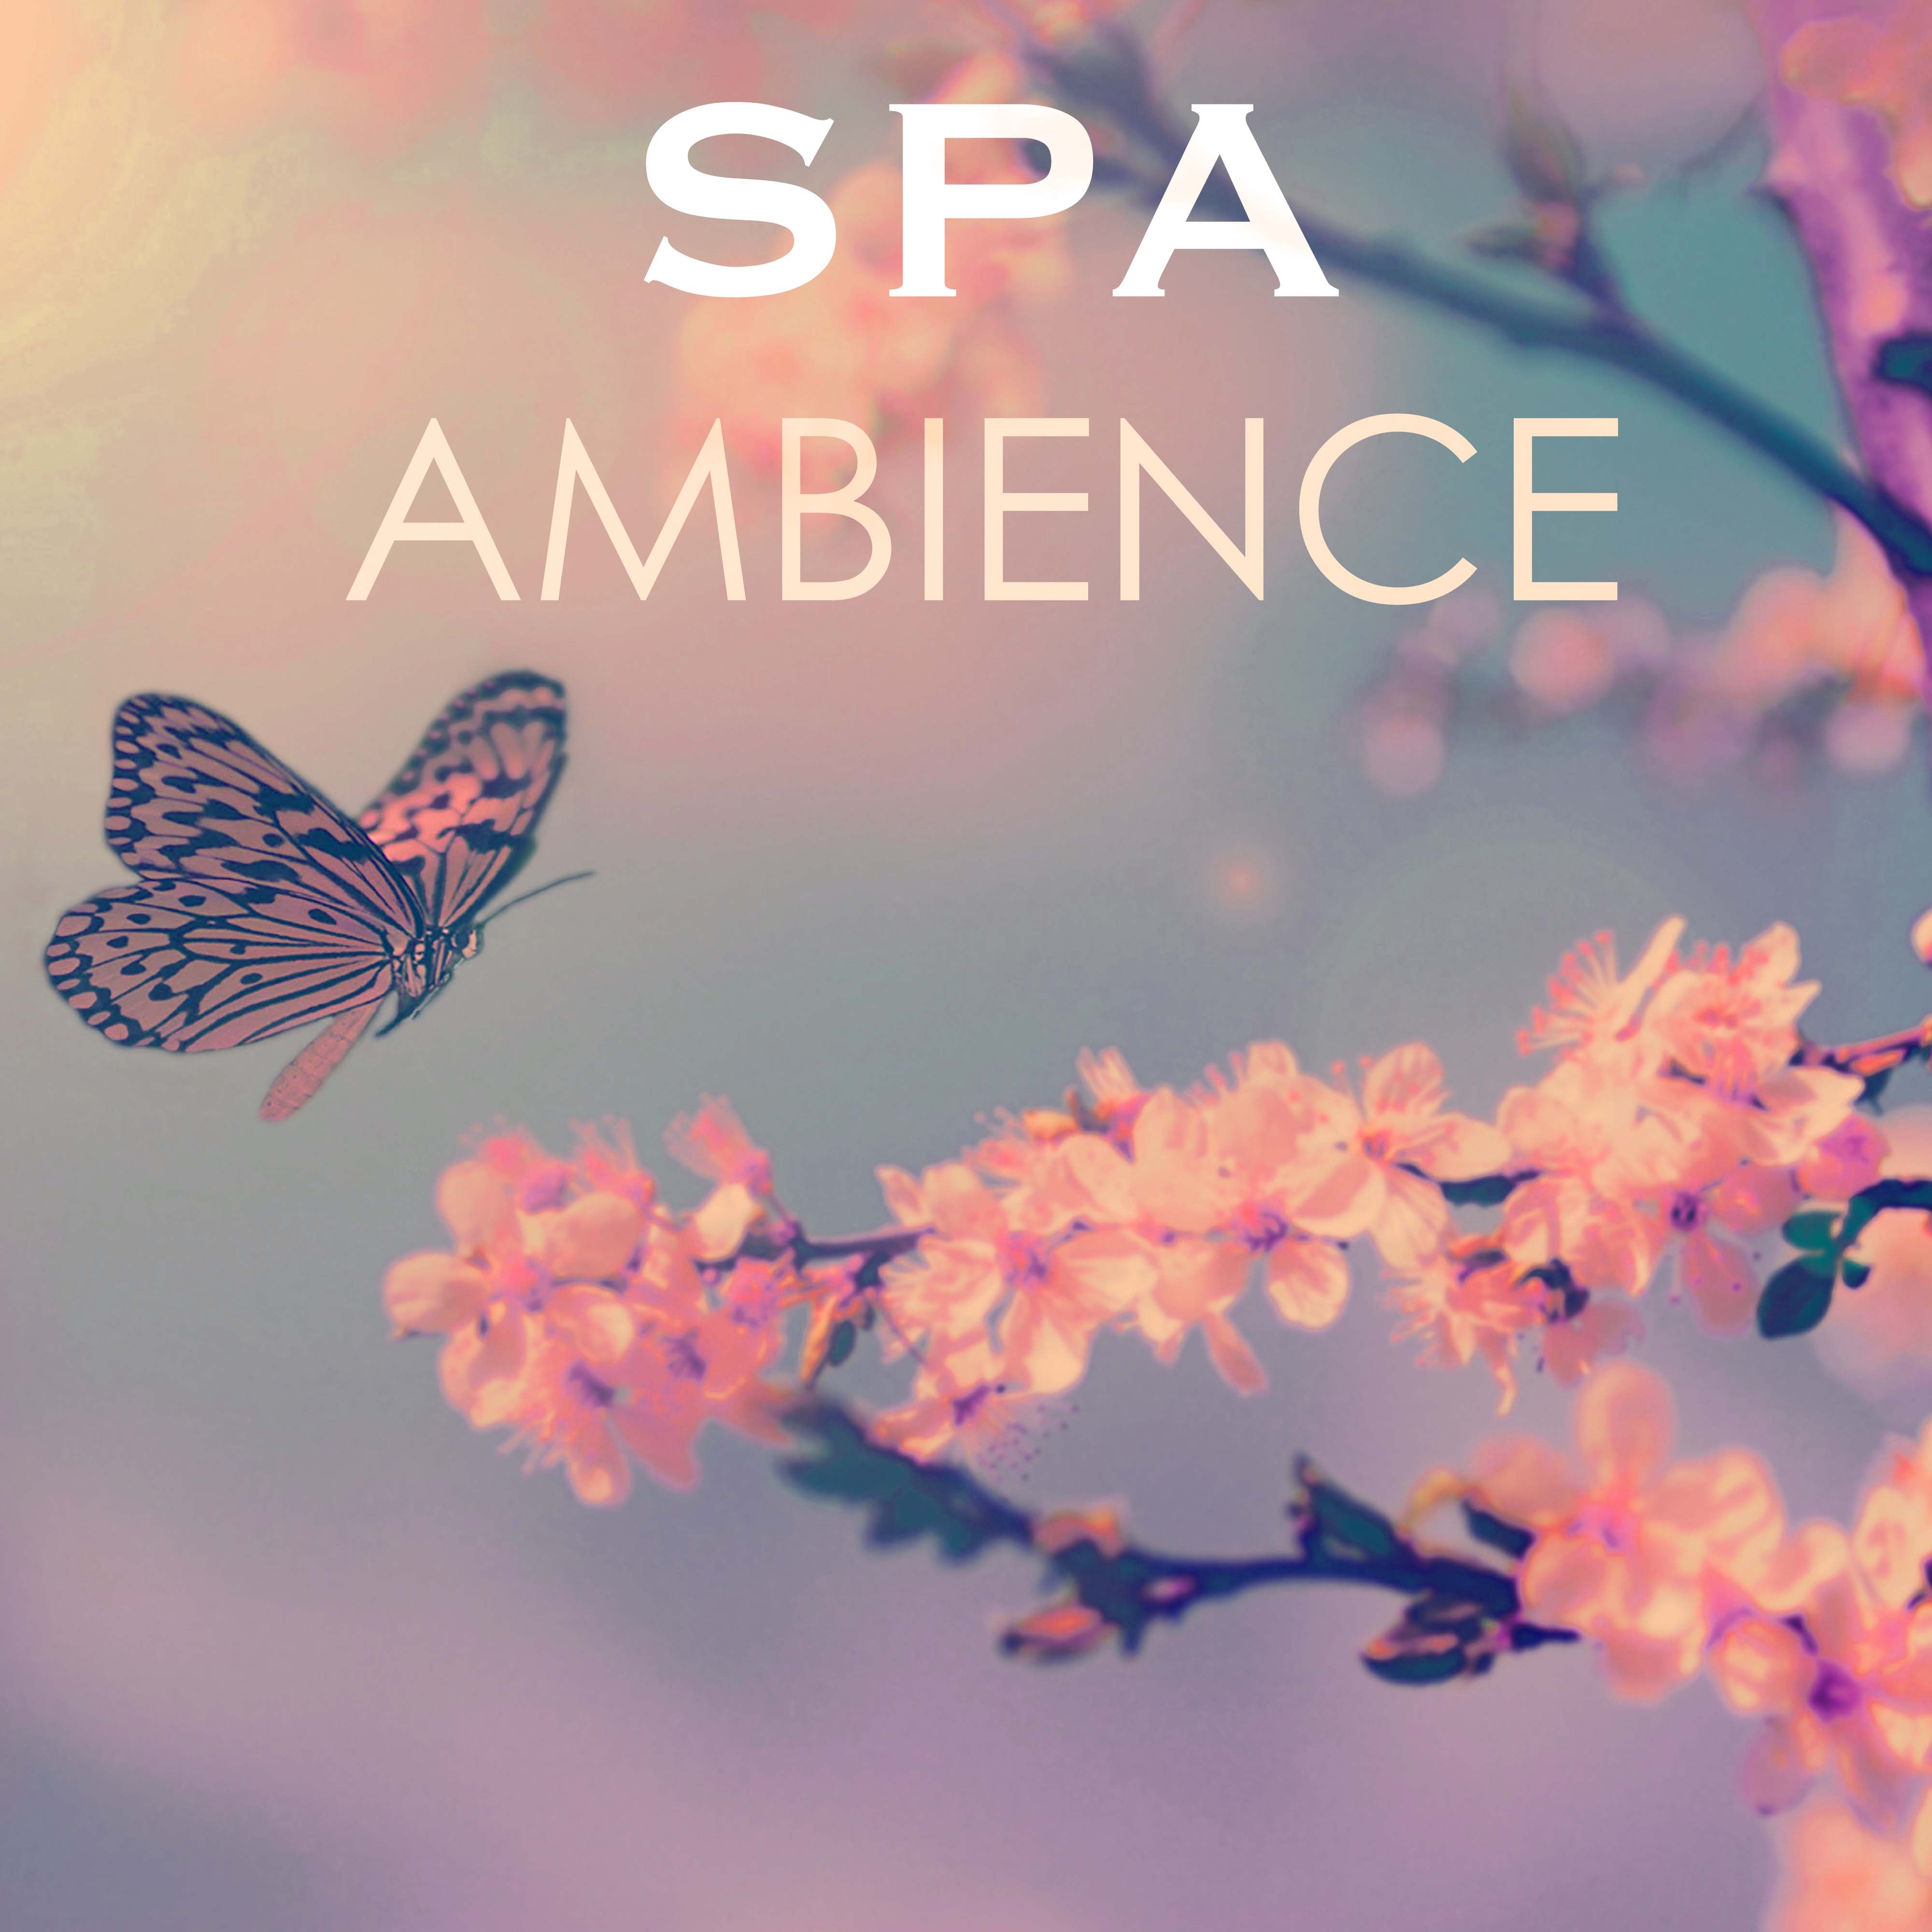 Spa Ambience - Instrumental Ambient Music